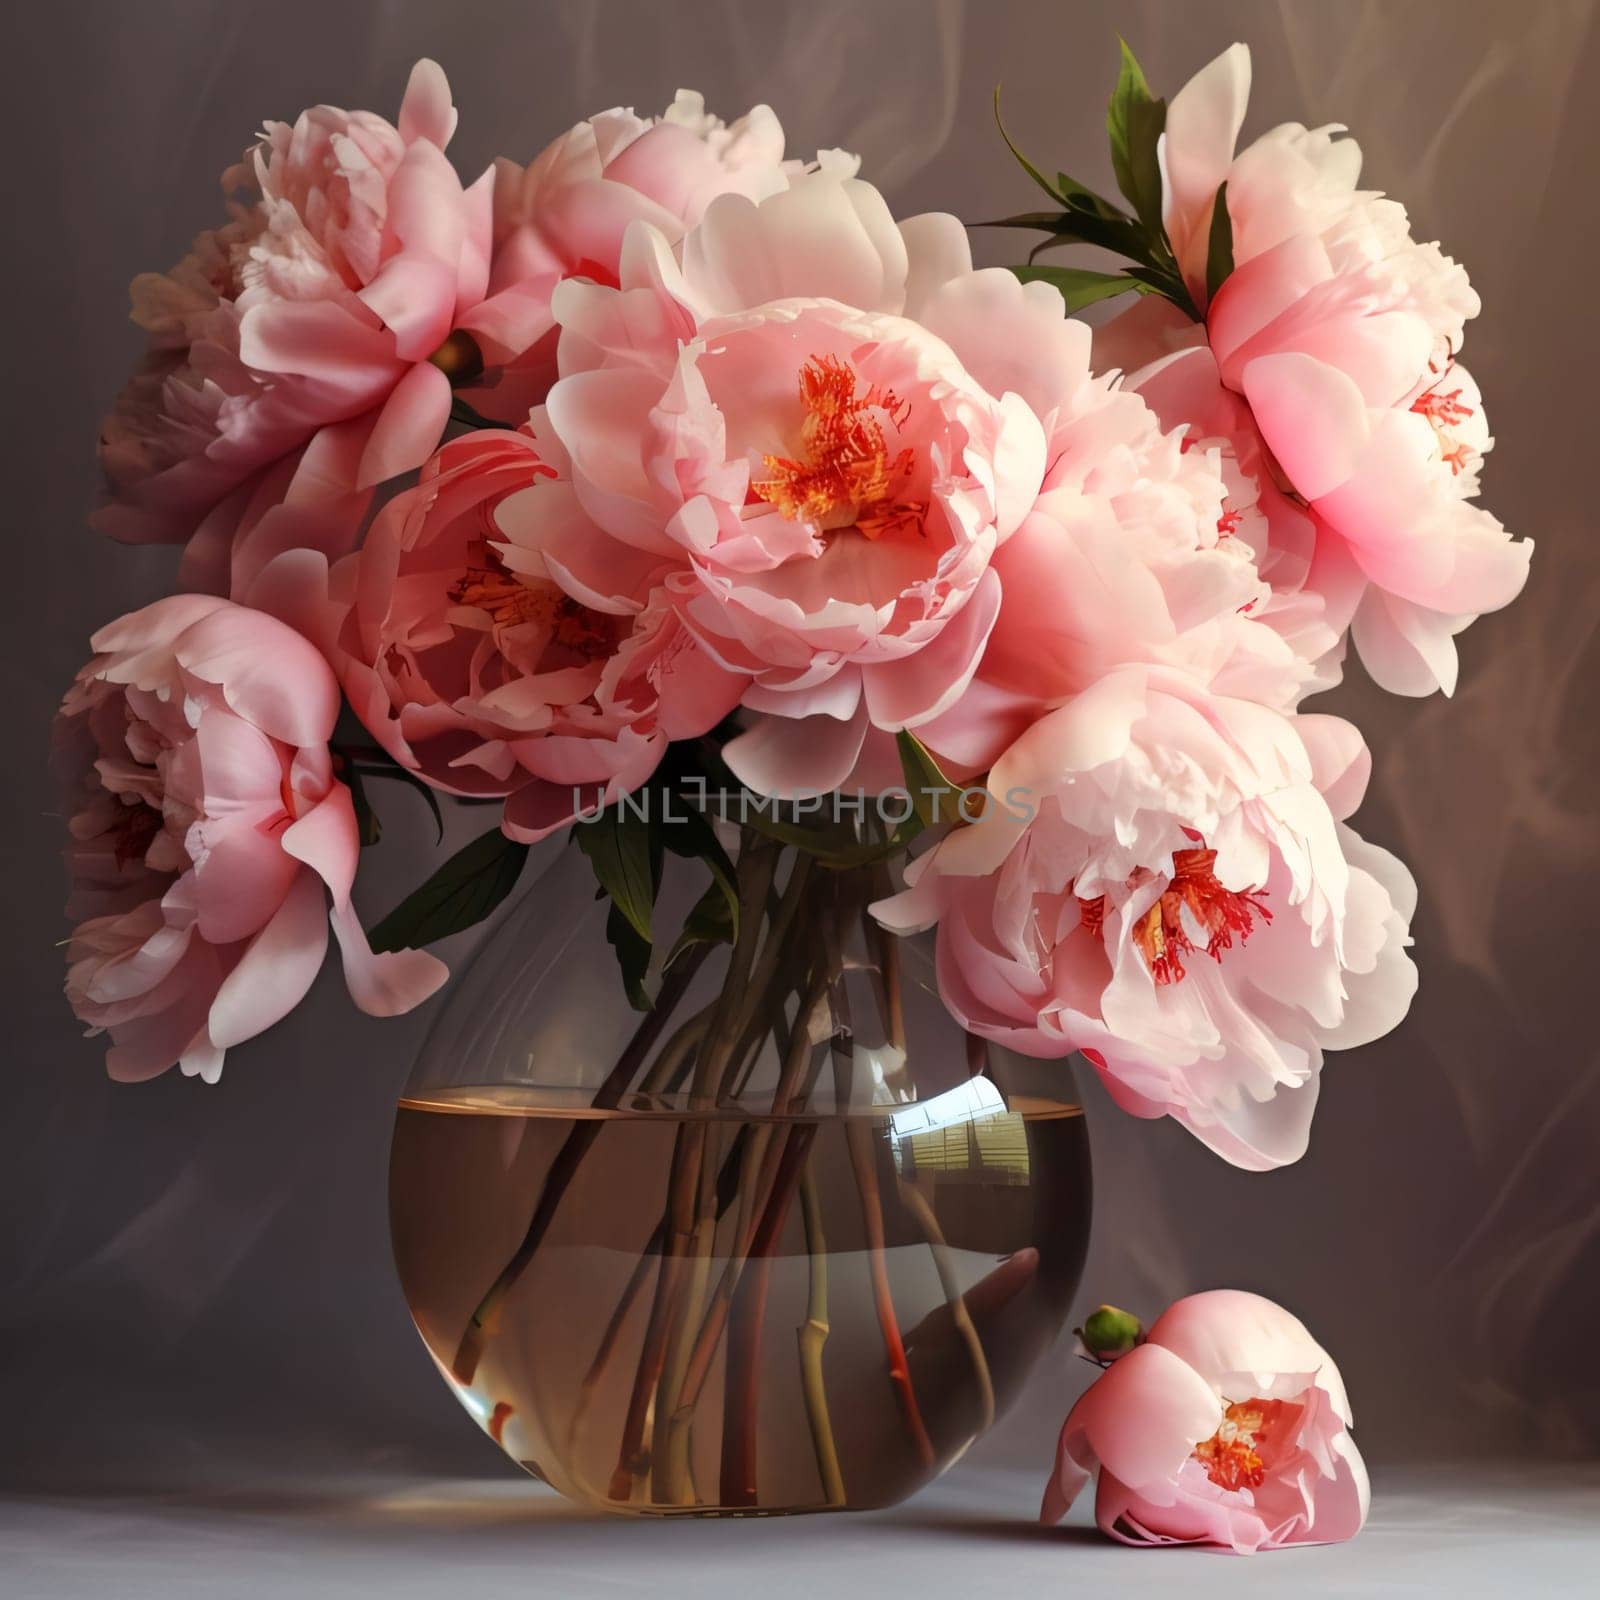 Bouquet of pink and white flowers in a transparent vase on a dark background. Flowering flowers, a symbol of spring, new life. A joyful time of nature waking up to life.